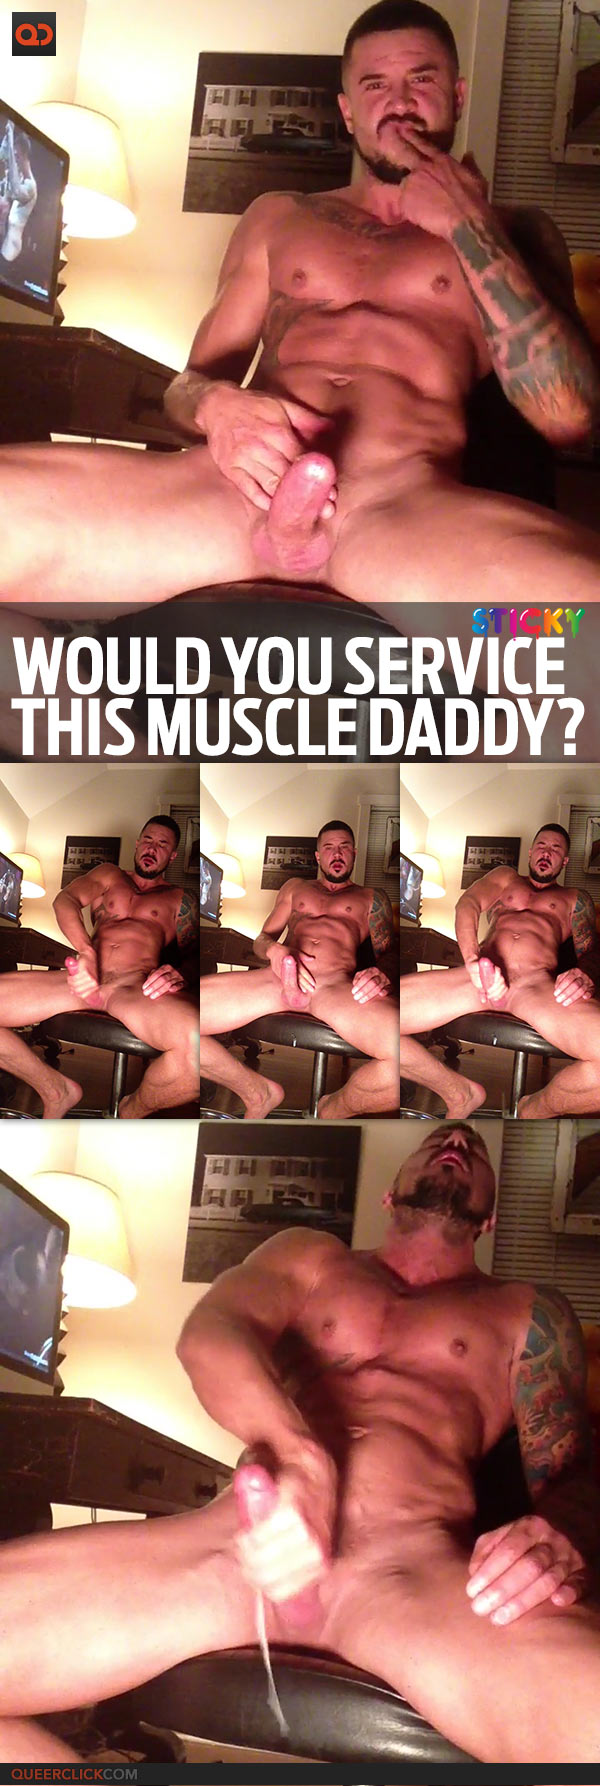 qc-sticky-muscle_daddy-teaser